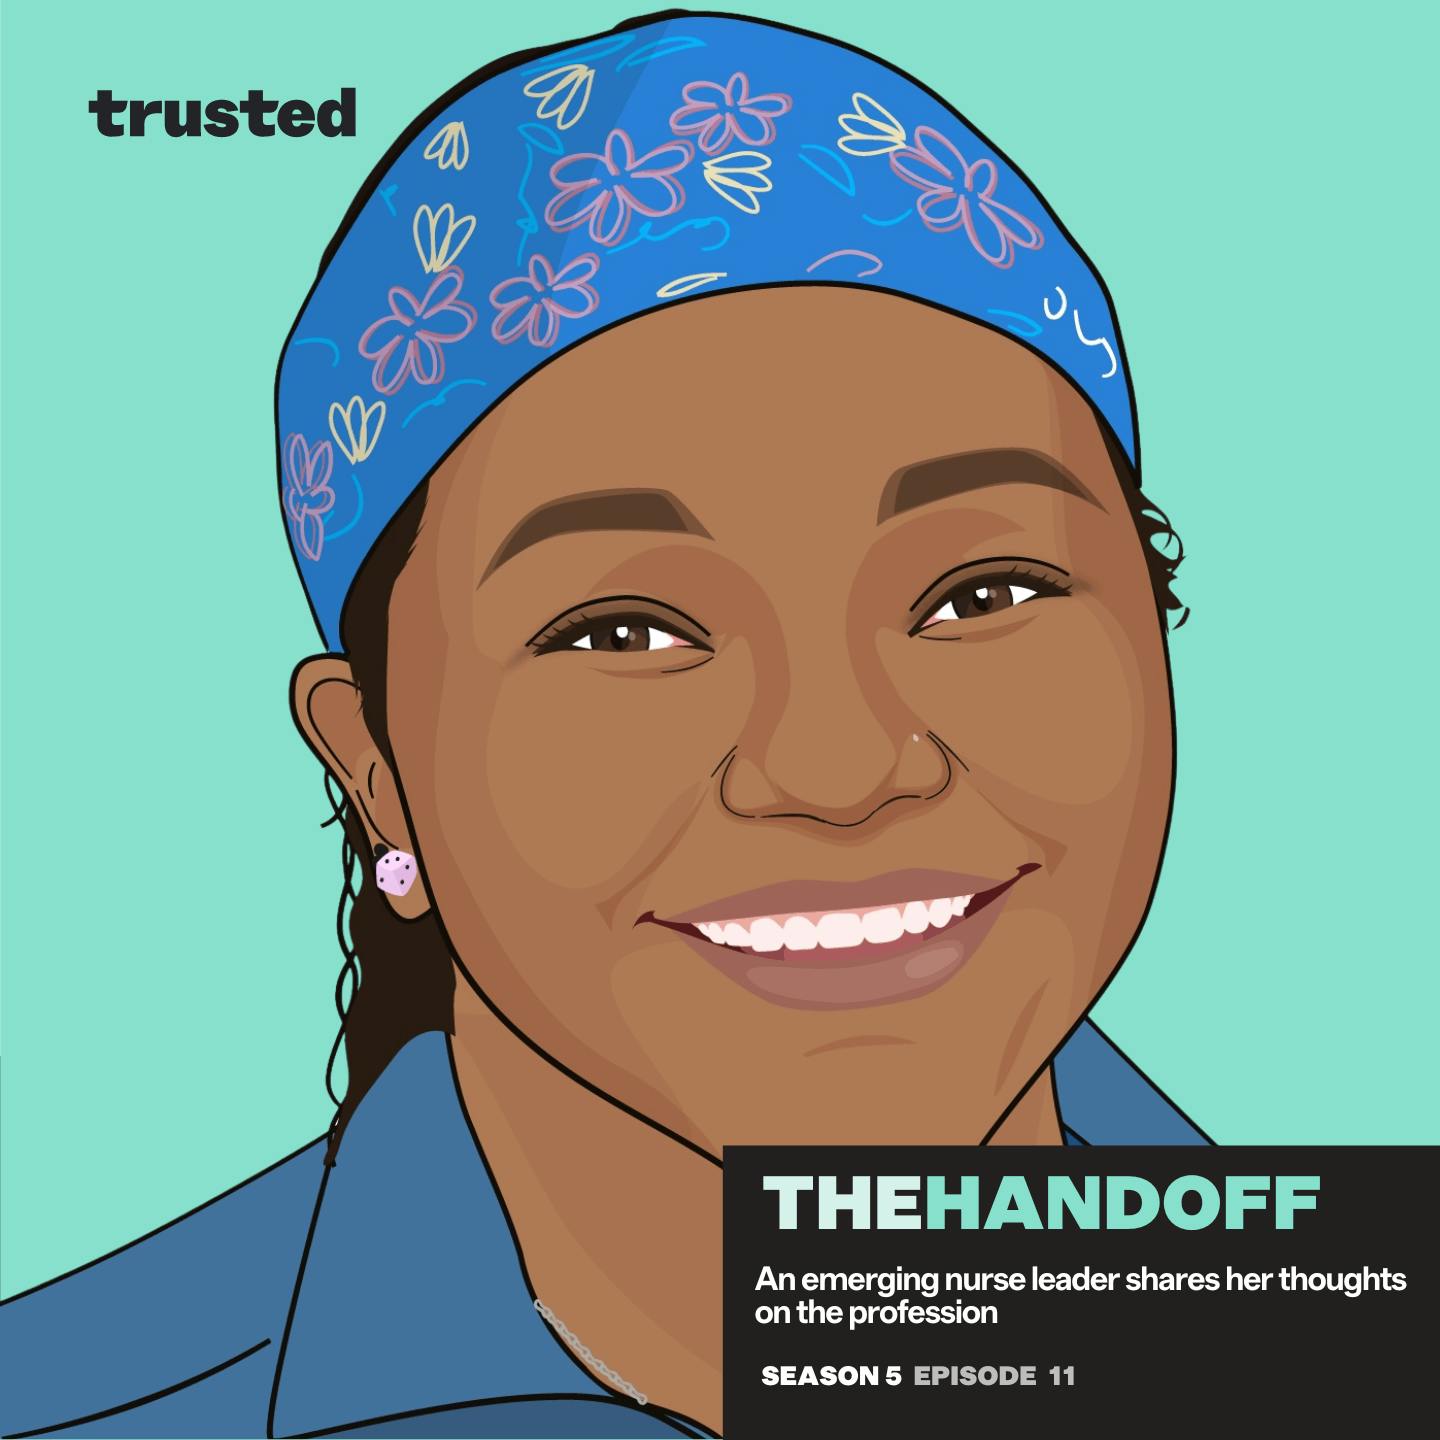 The Handoff: An emerging nurse leader shares her thoughts on the profession